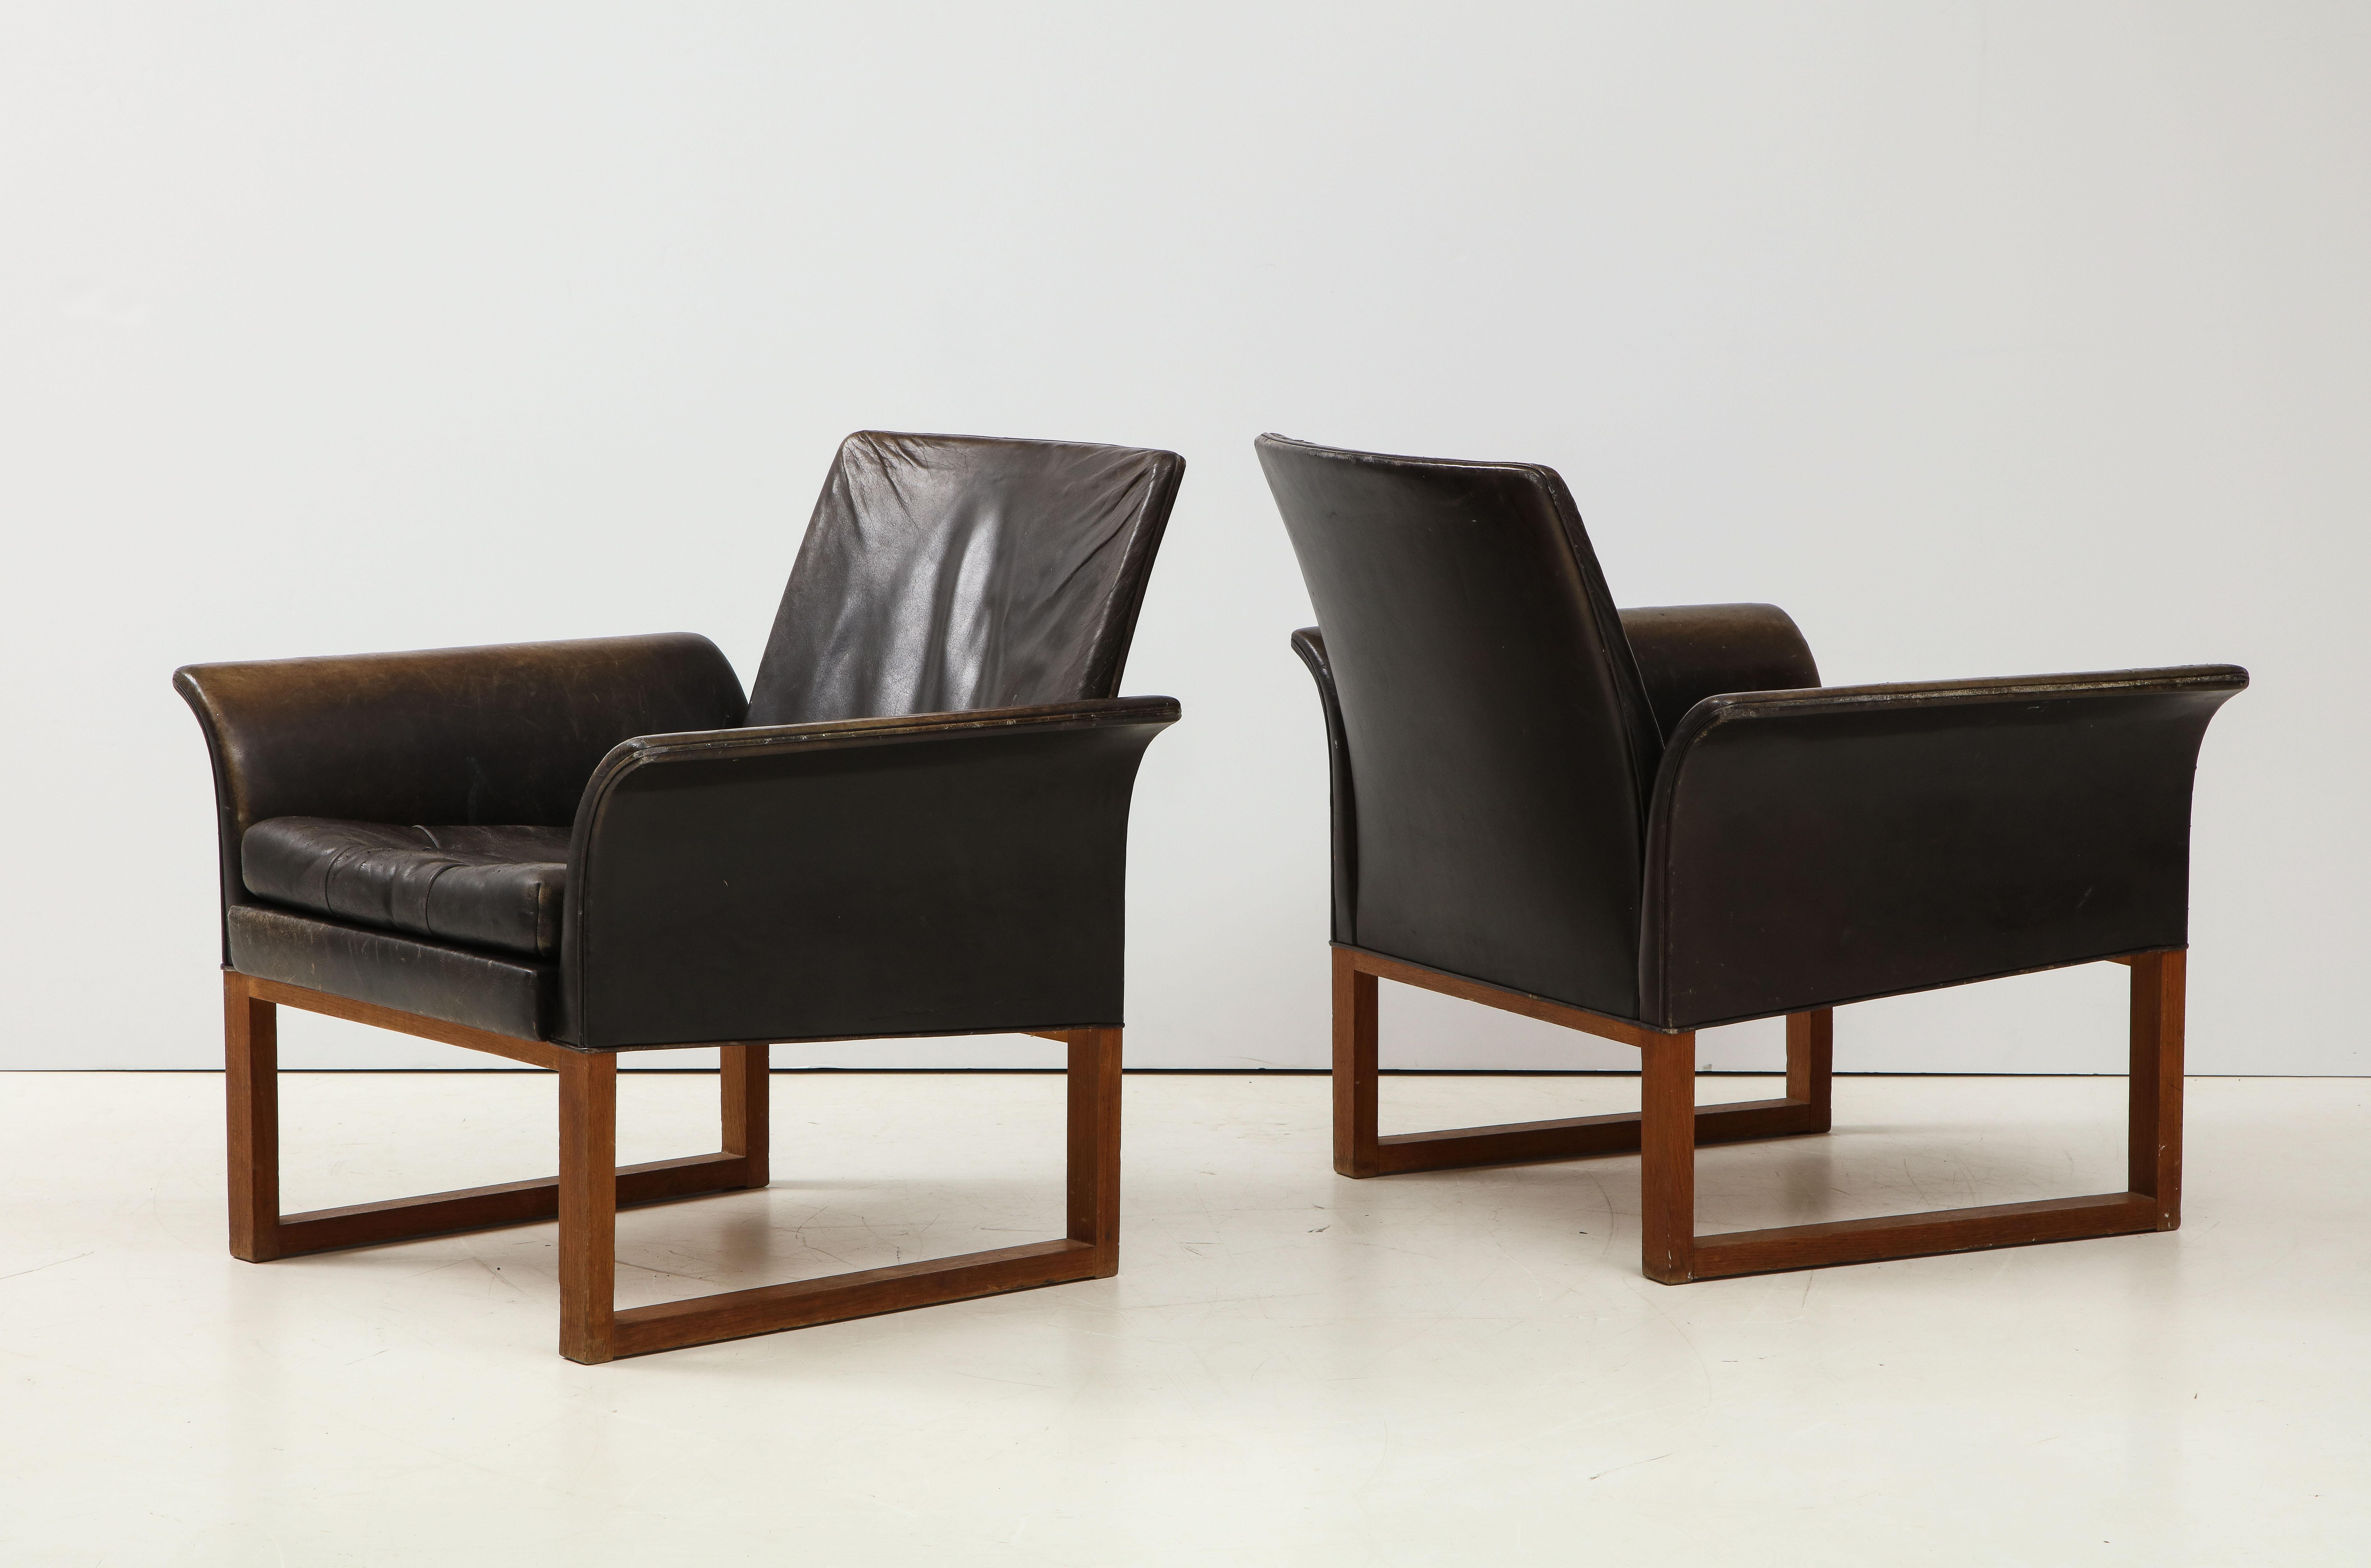 Swedish Pair of Rare Mid-Century Leather Club Chairs, Sweden, circa 1950s